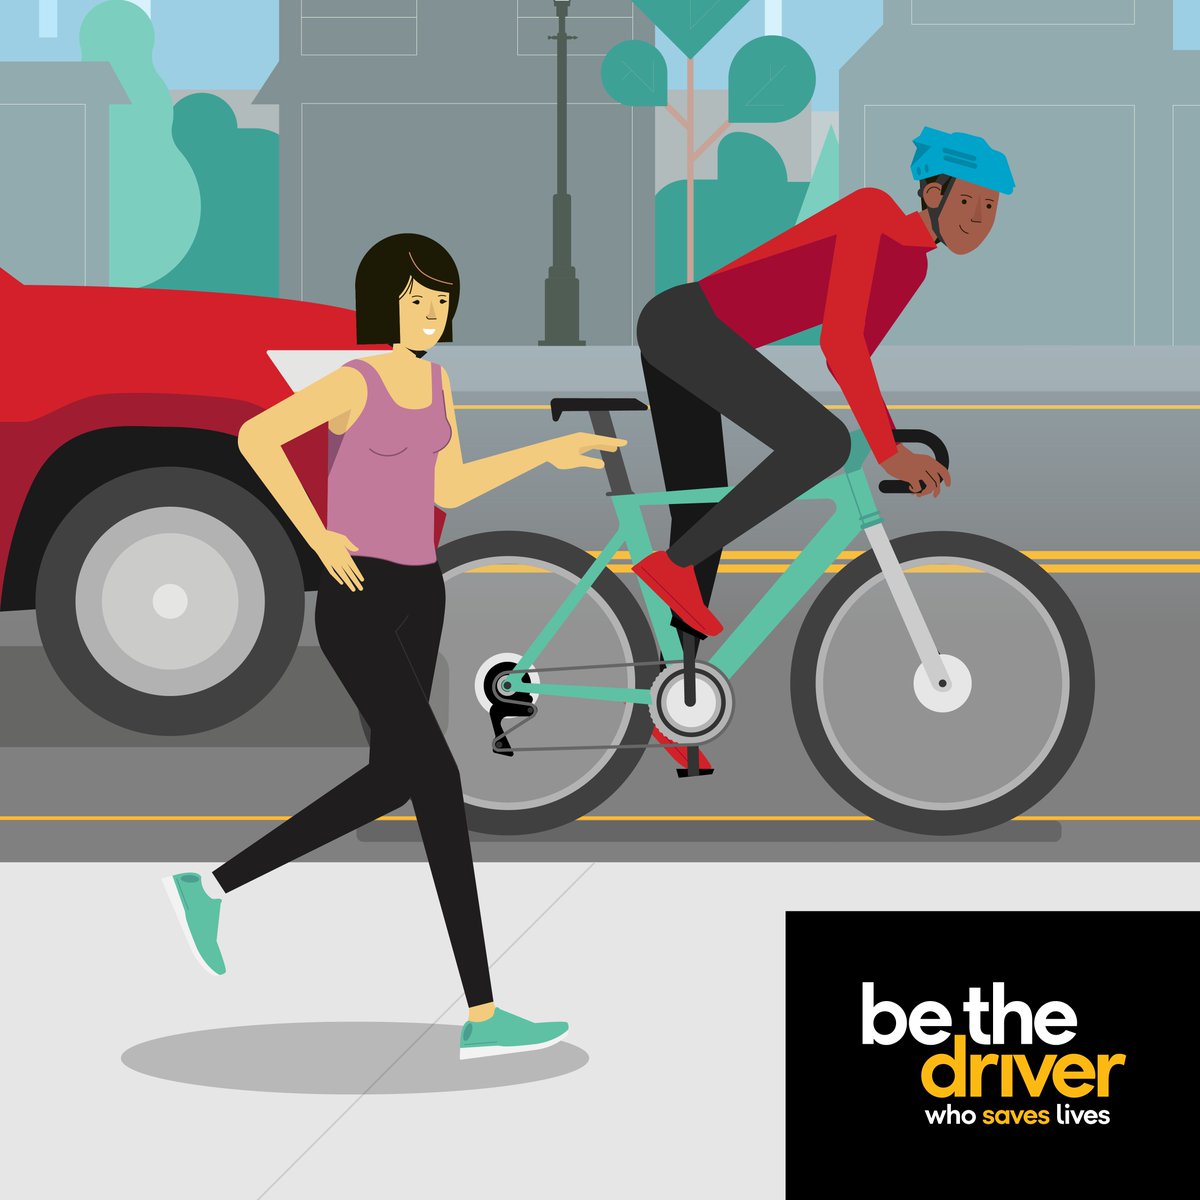 In case of a crash, your helmet could just save your life. No ride should start without one. #BeTheDriver #BicycleSafety #BCoPD